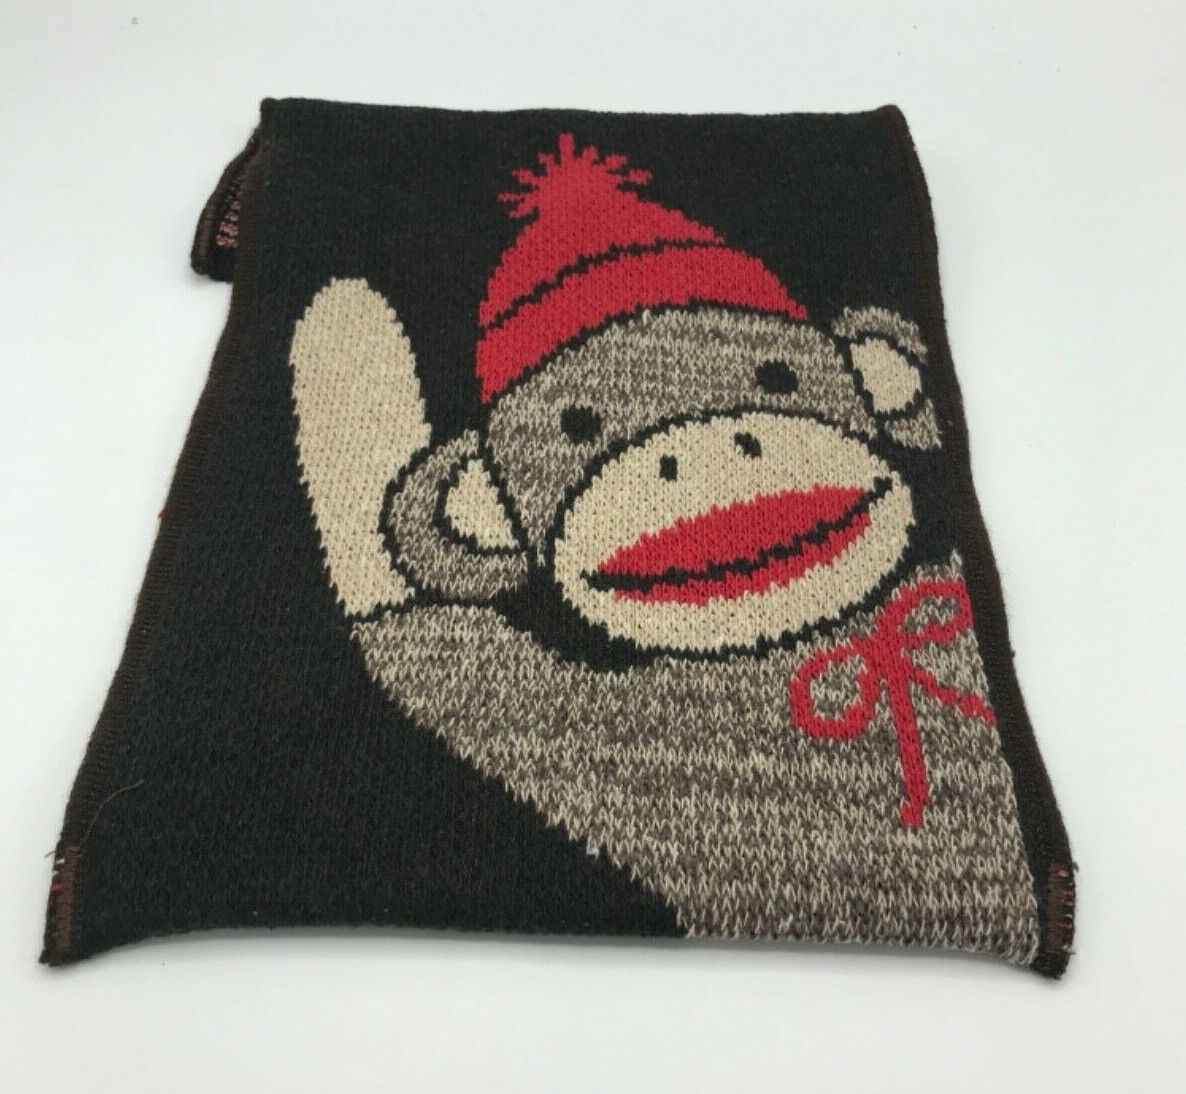 Sock Monkey Tablet or Ipad Cover/Bag Knit NWT 8 inches x 11.75 inches by Green3